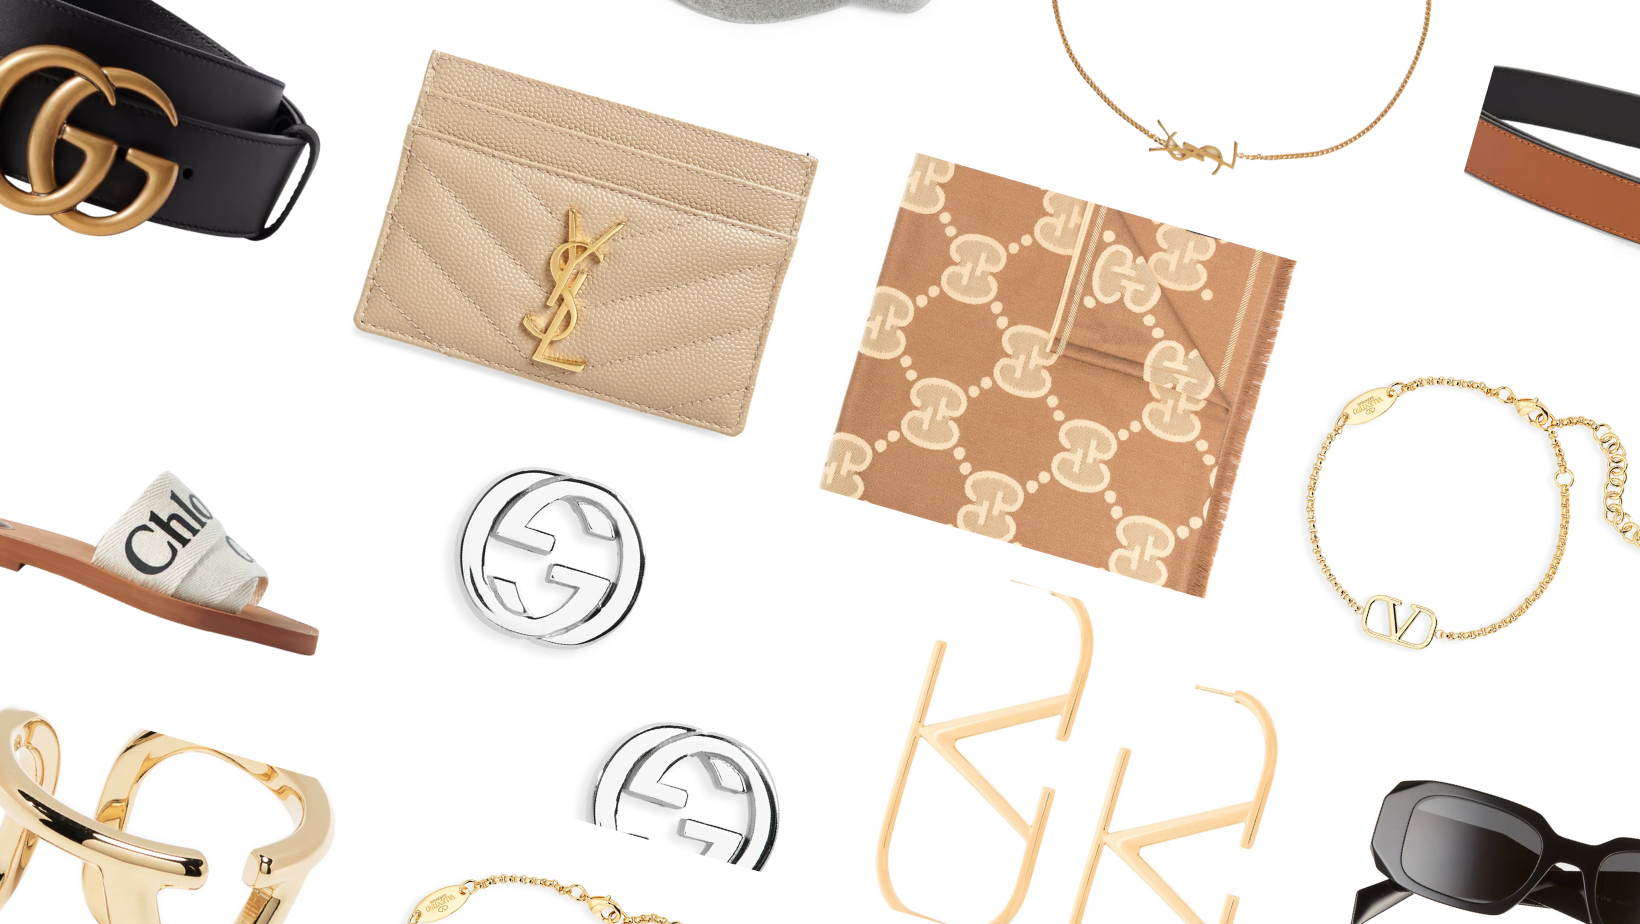 LOUIS VUITTON GIFT GUIDE FOR HER UNDER $500